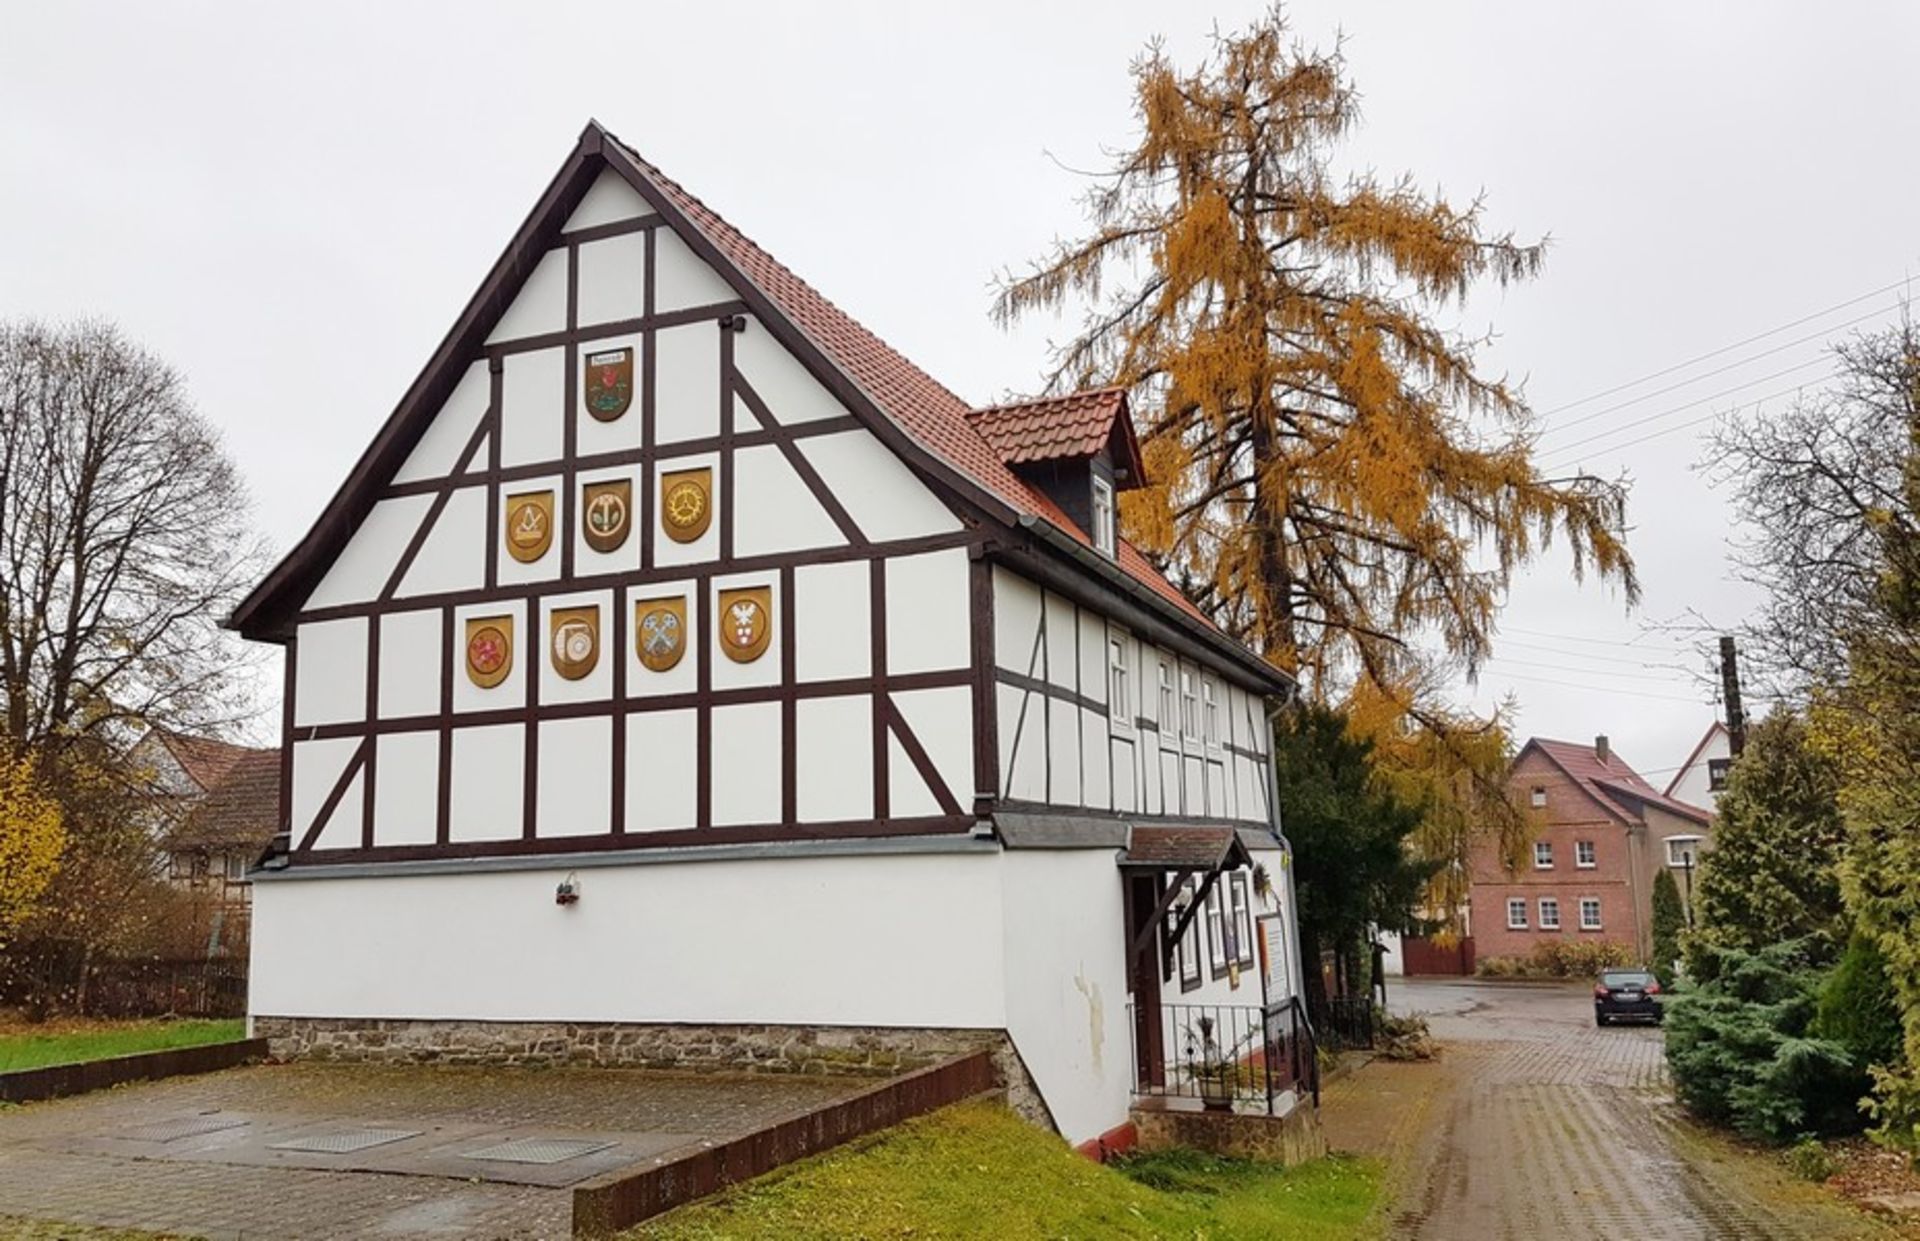 Two Storey Family Home in Sudharz, Germany only 10% BUYER'S PREMIUM TODAY - Image 50 of 51